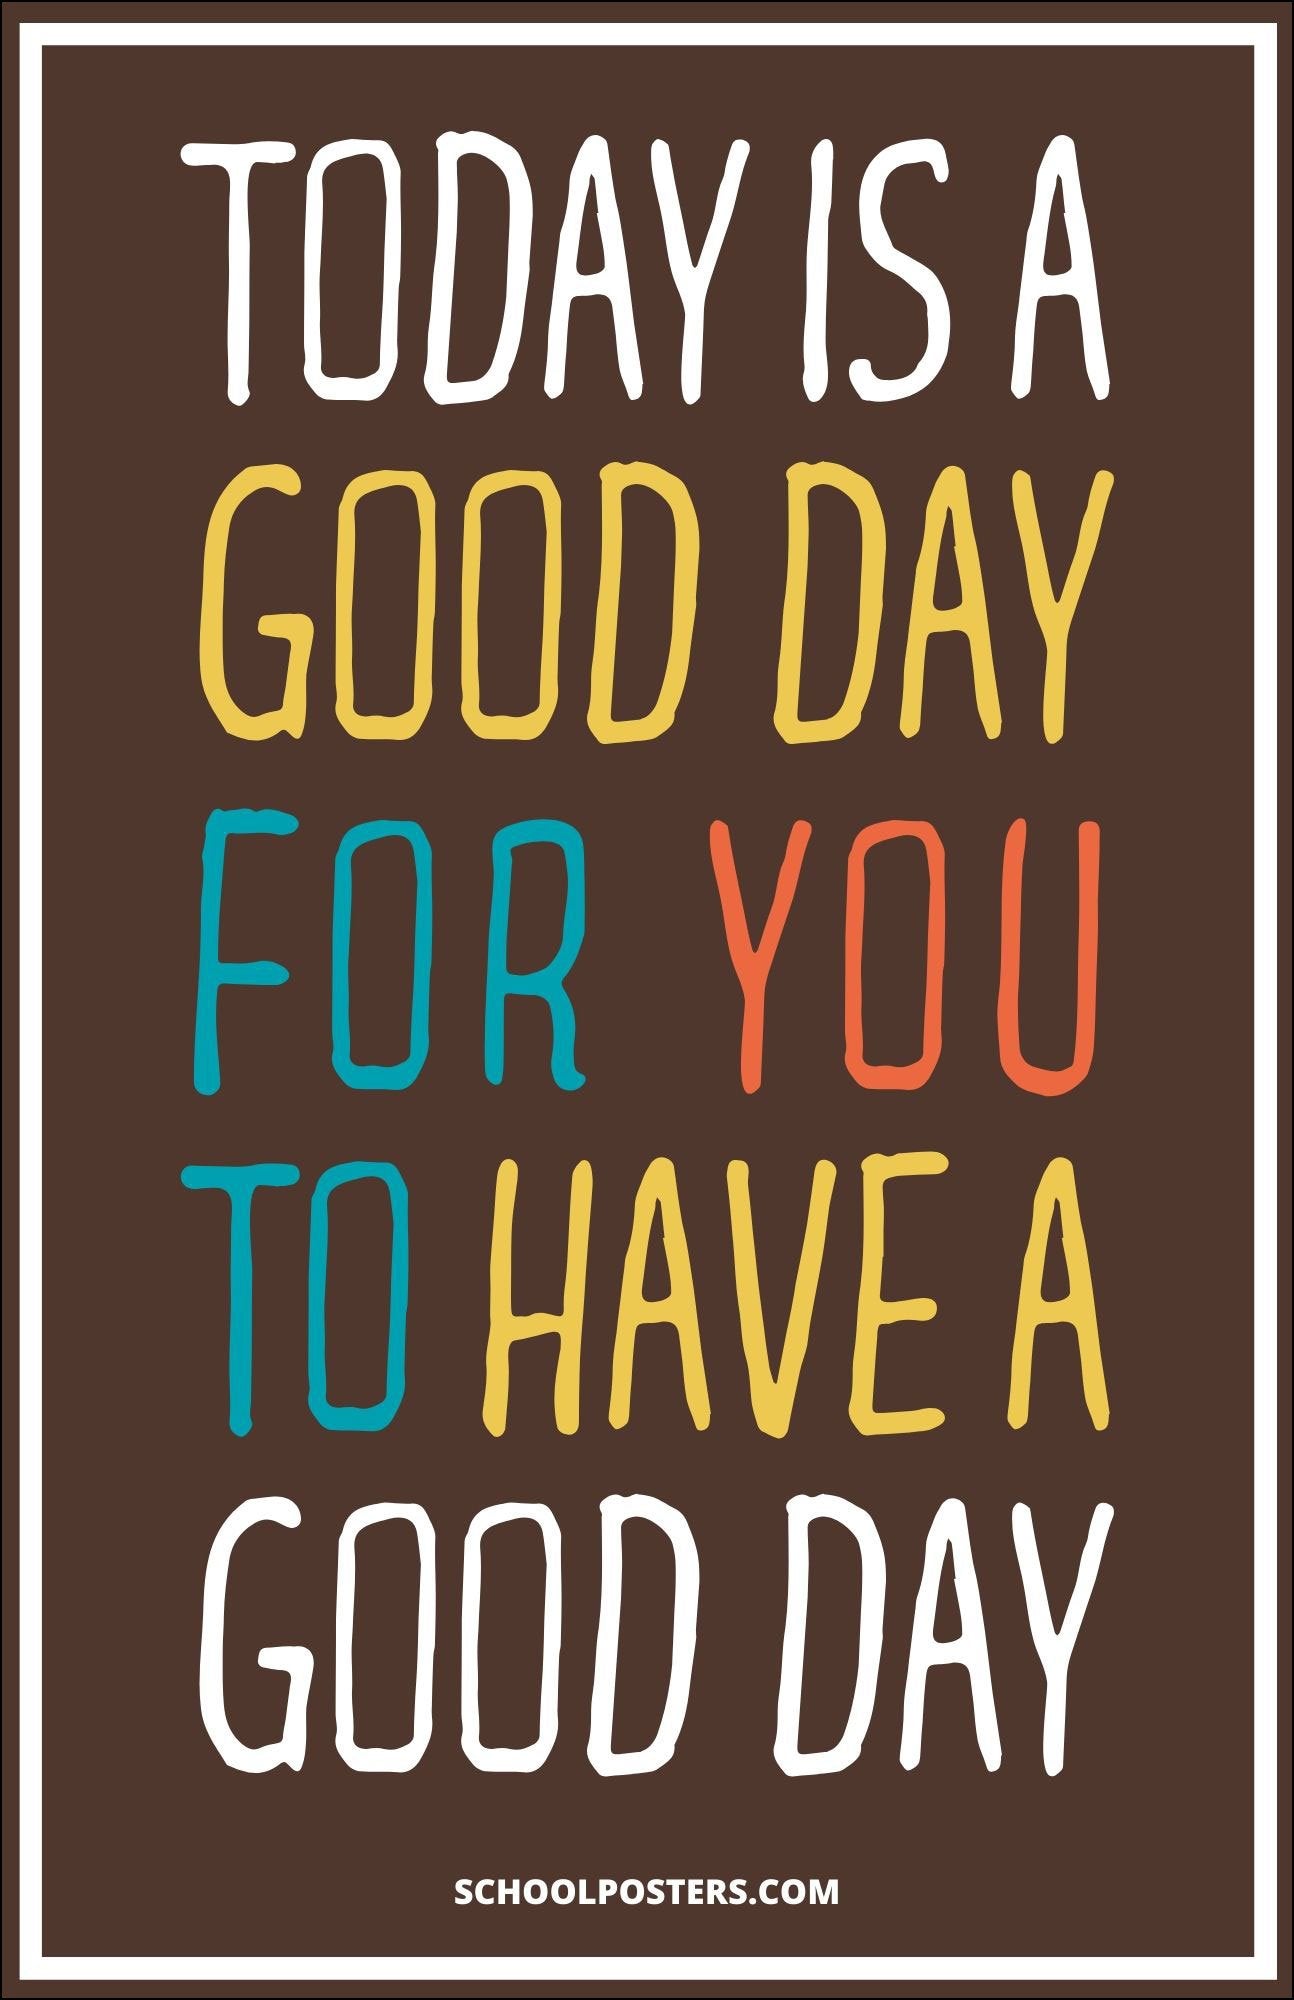 Have A Good Day Poster